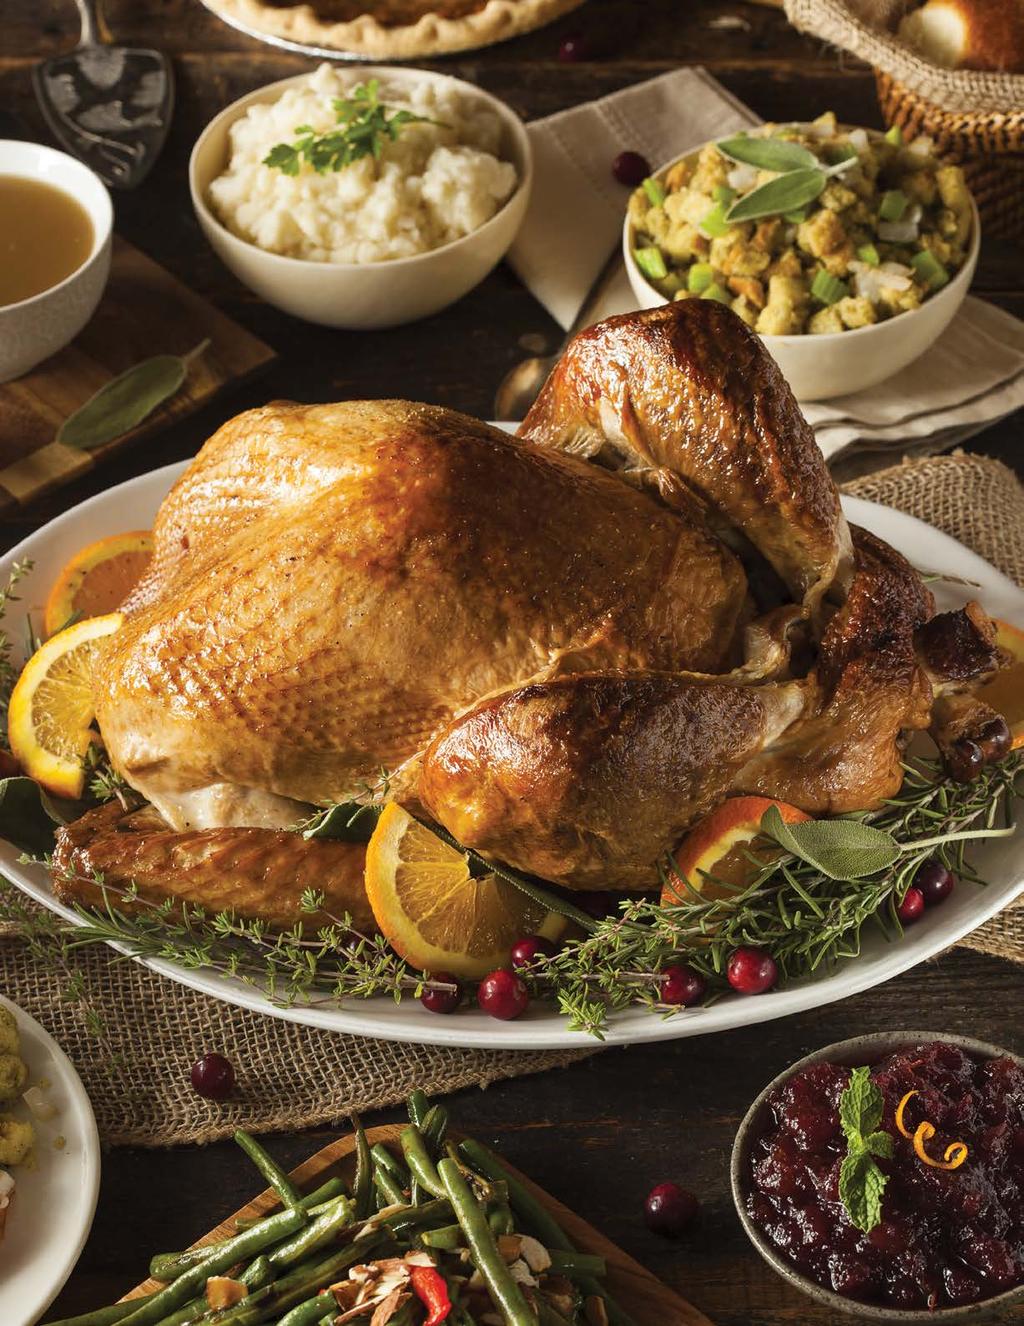 TURKEY FORMS Special order any of these birds until Sunday, November 19th. When deciding what size to order we recommend 1½ lbs. per person.